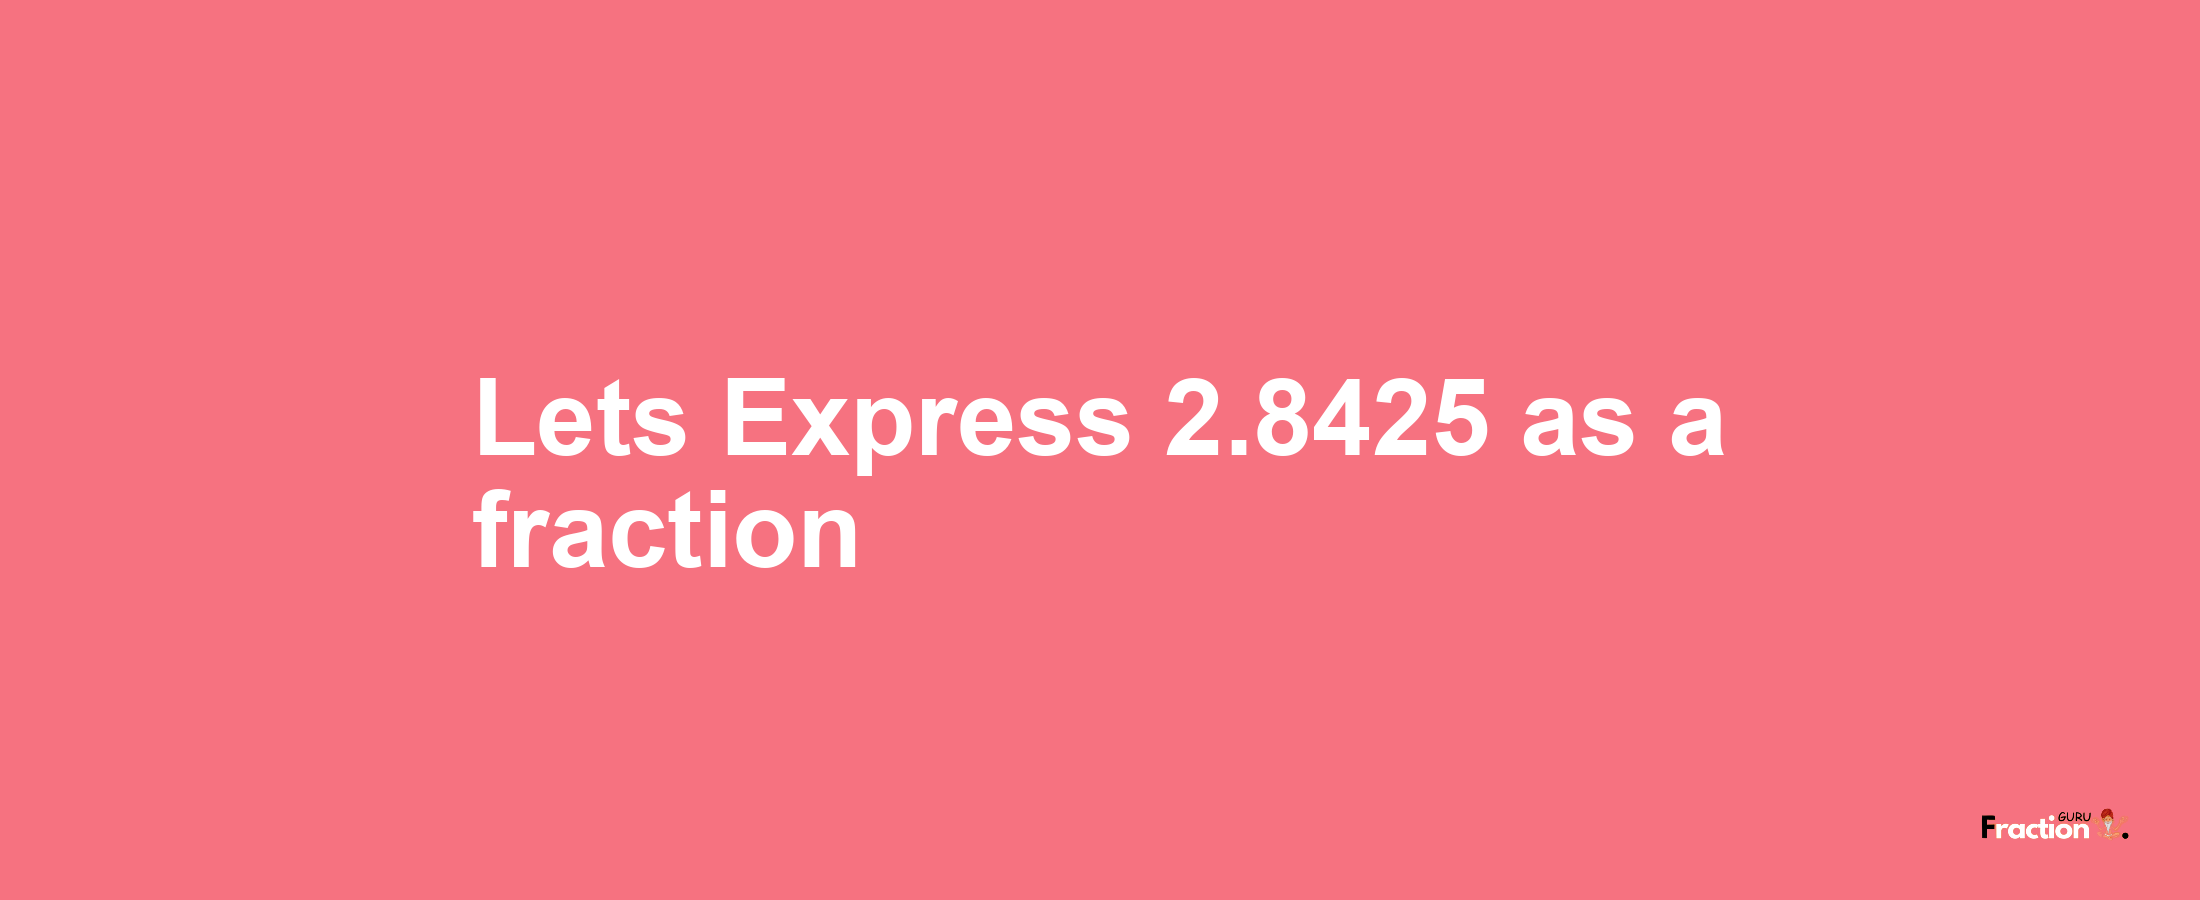 Lets Express 2.8425 as afraction